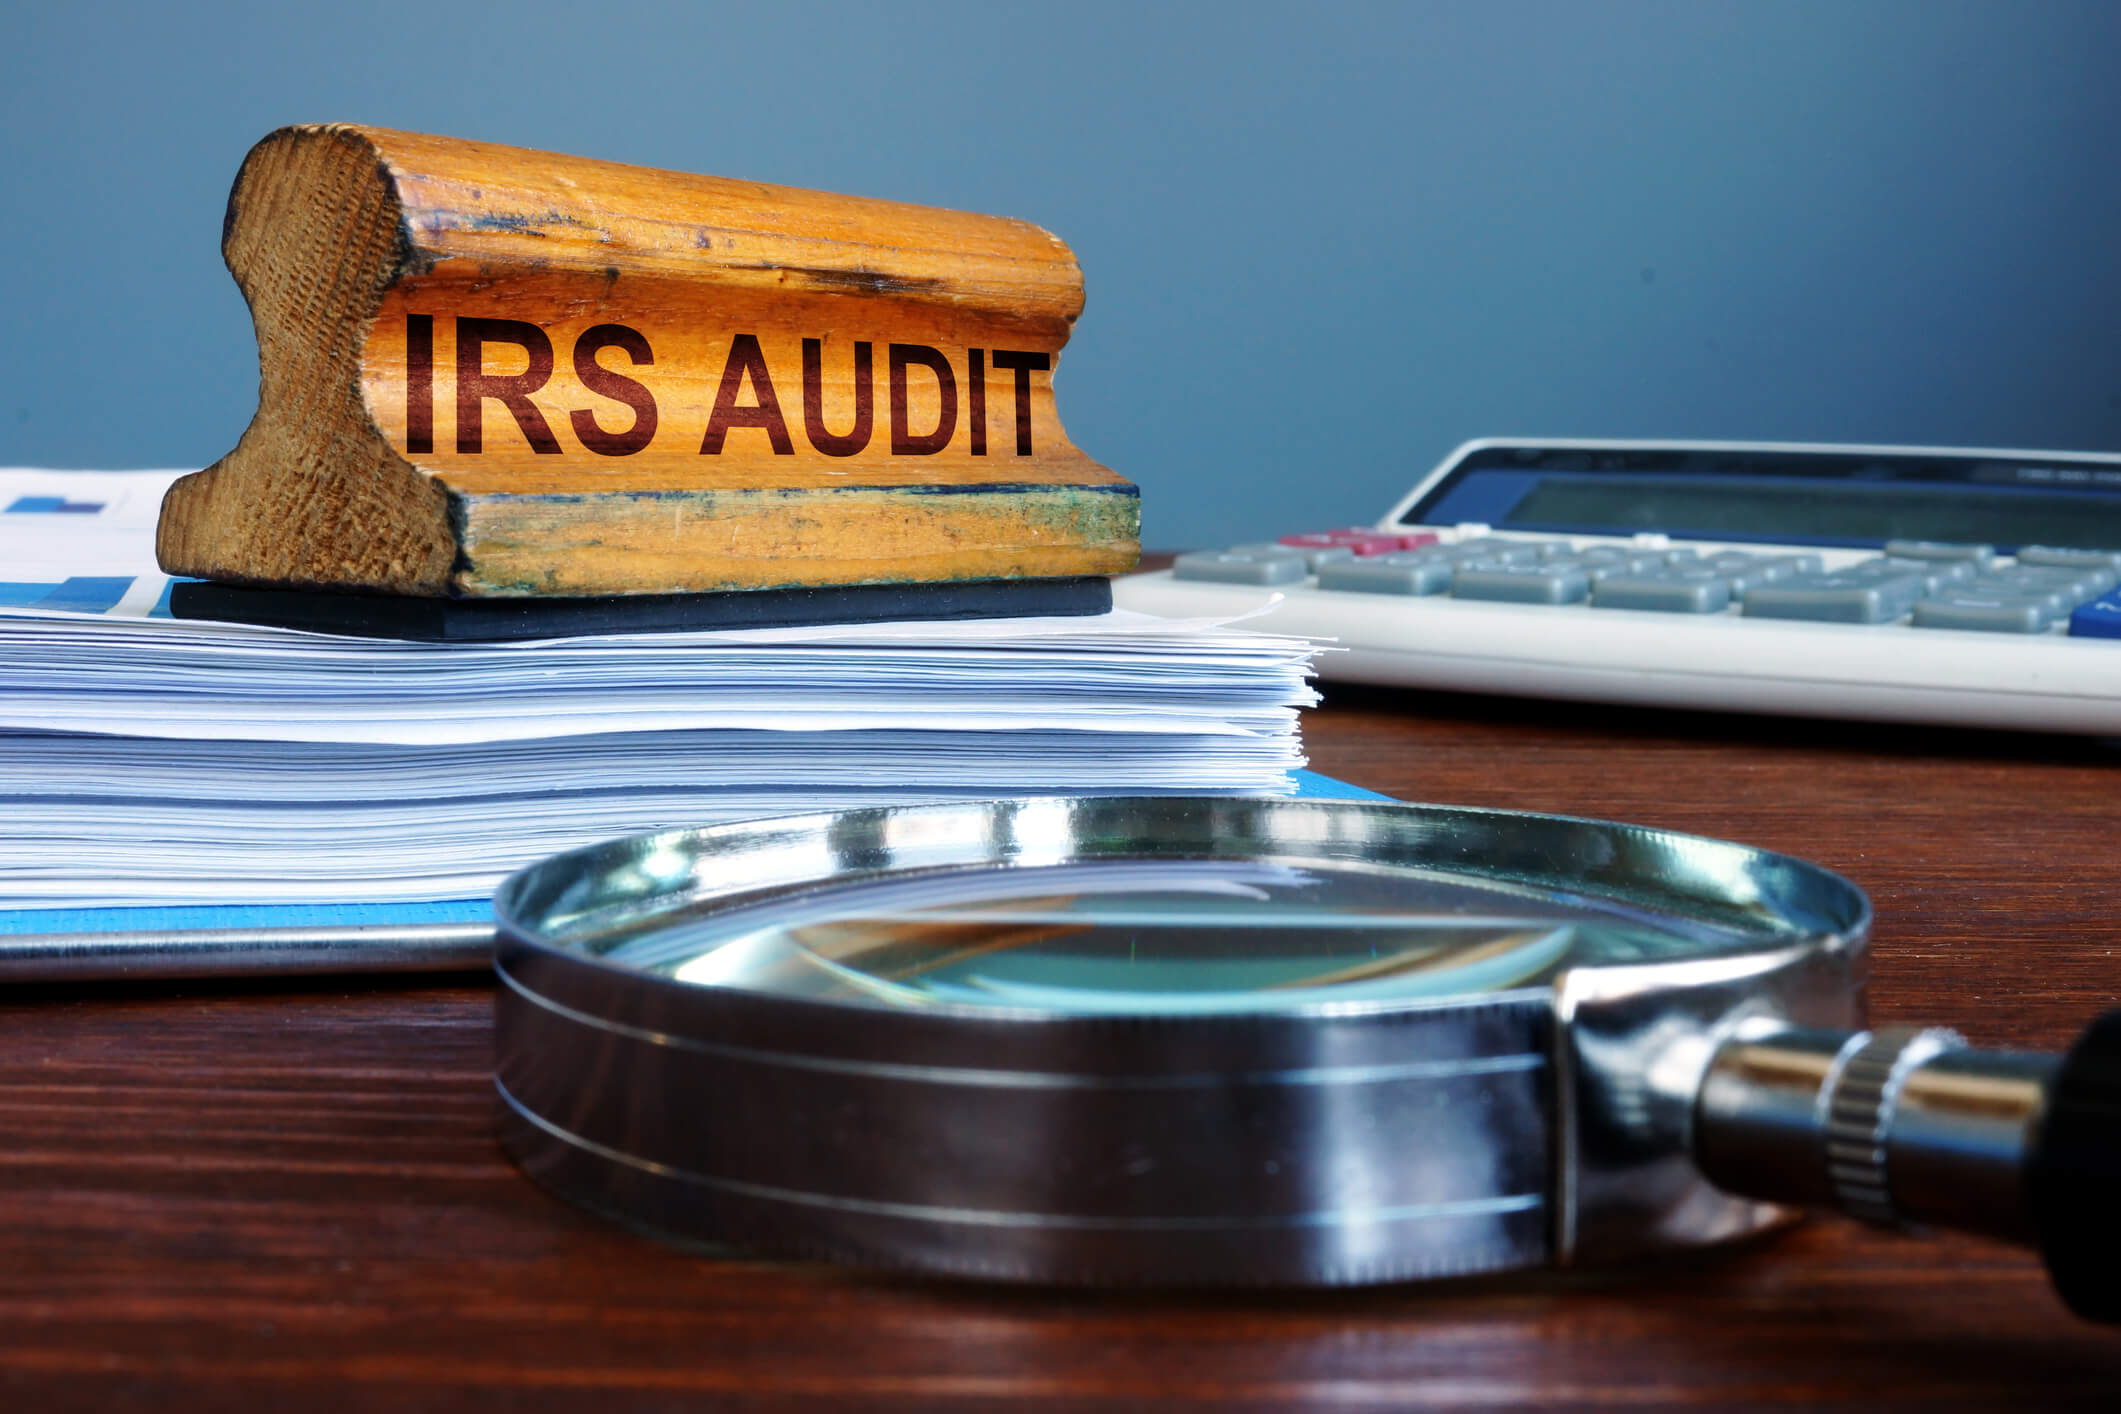 IRS Auditing - Complete Controller